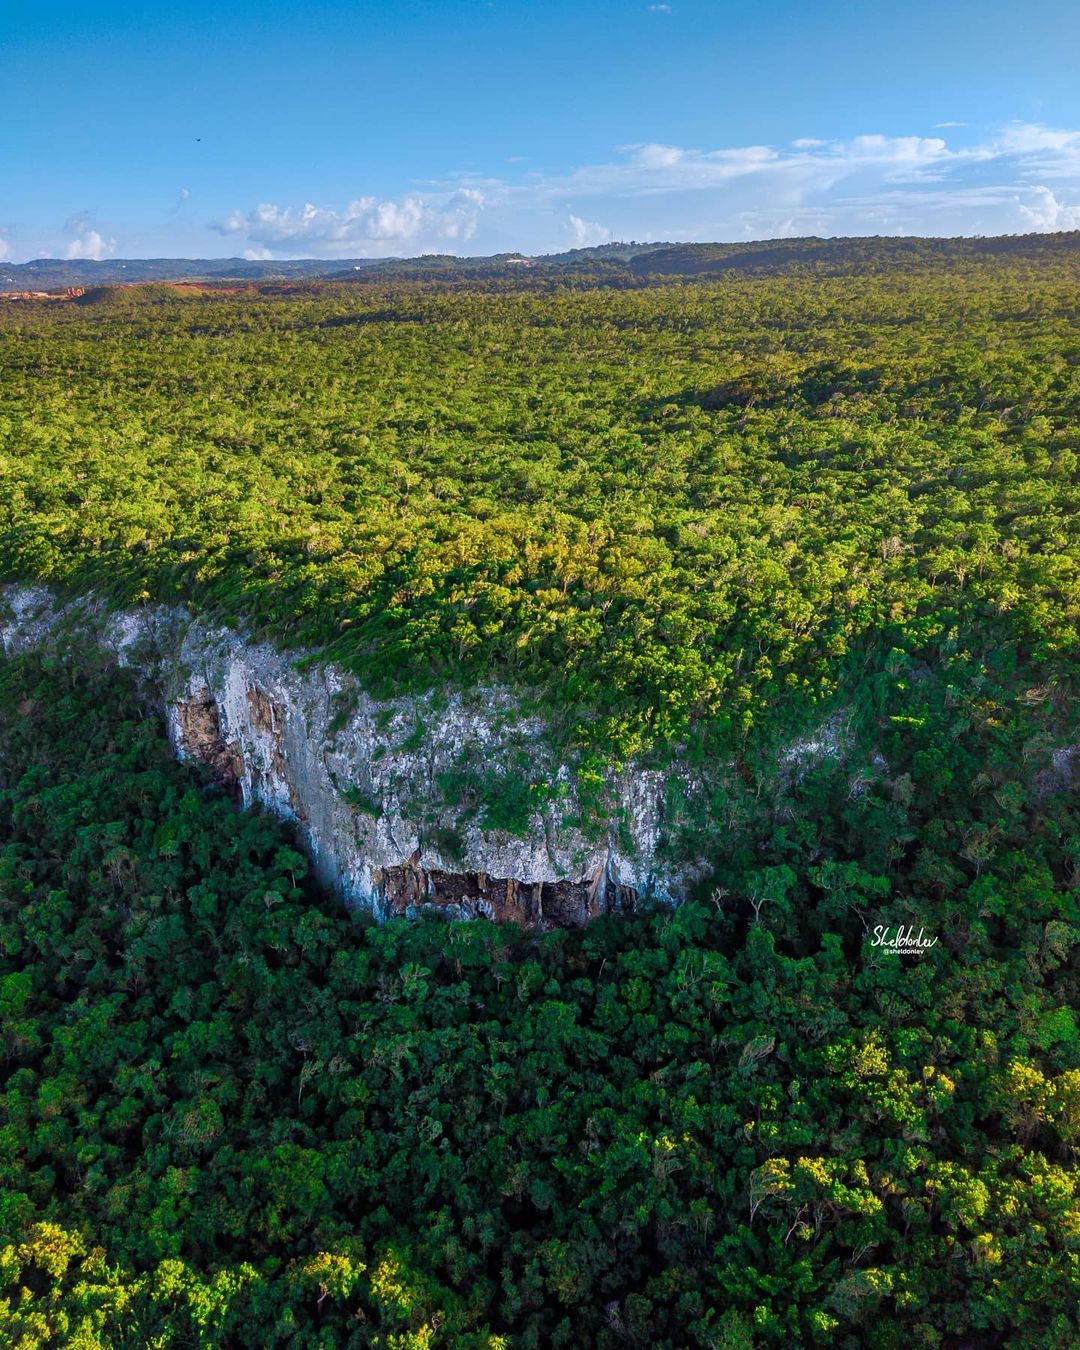 Arial shot of the rock climbing crag at Discovery bay, jamaica